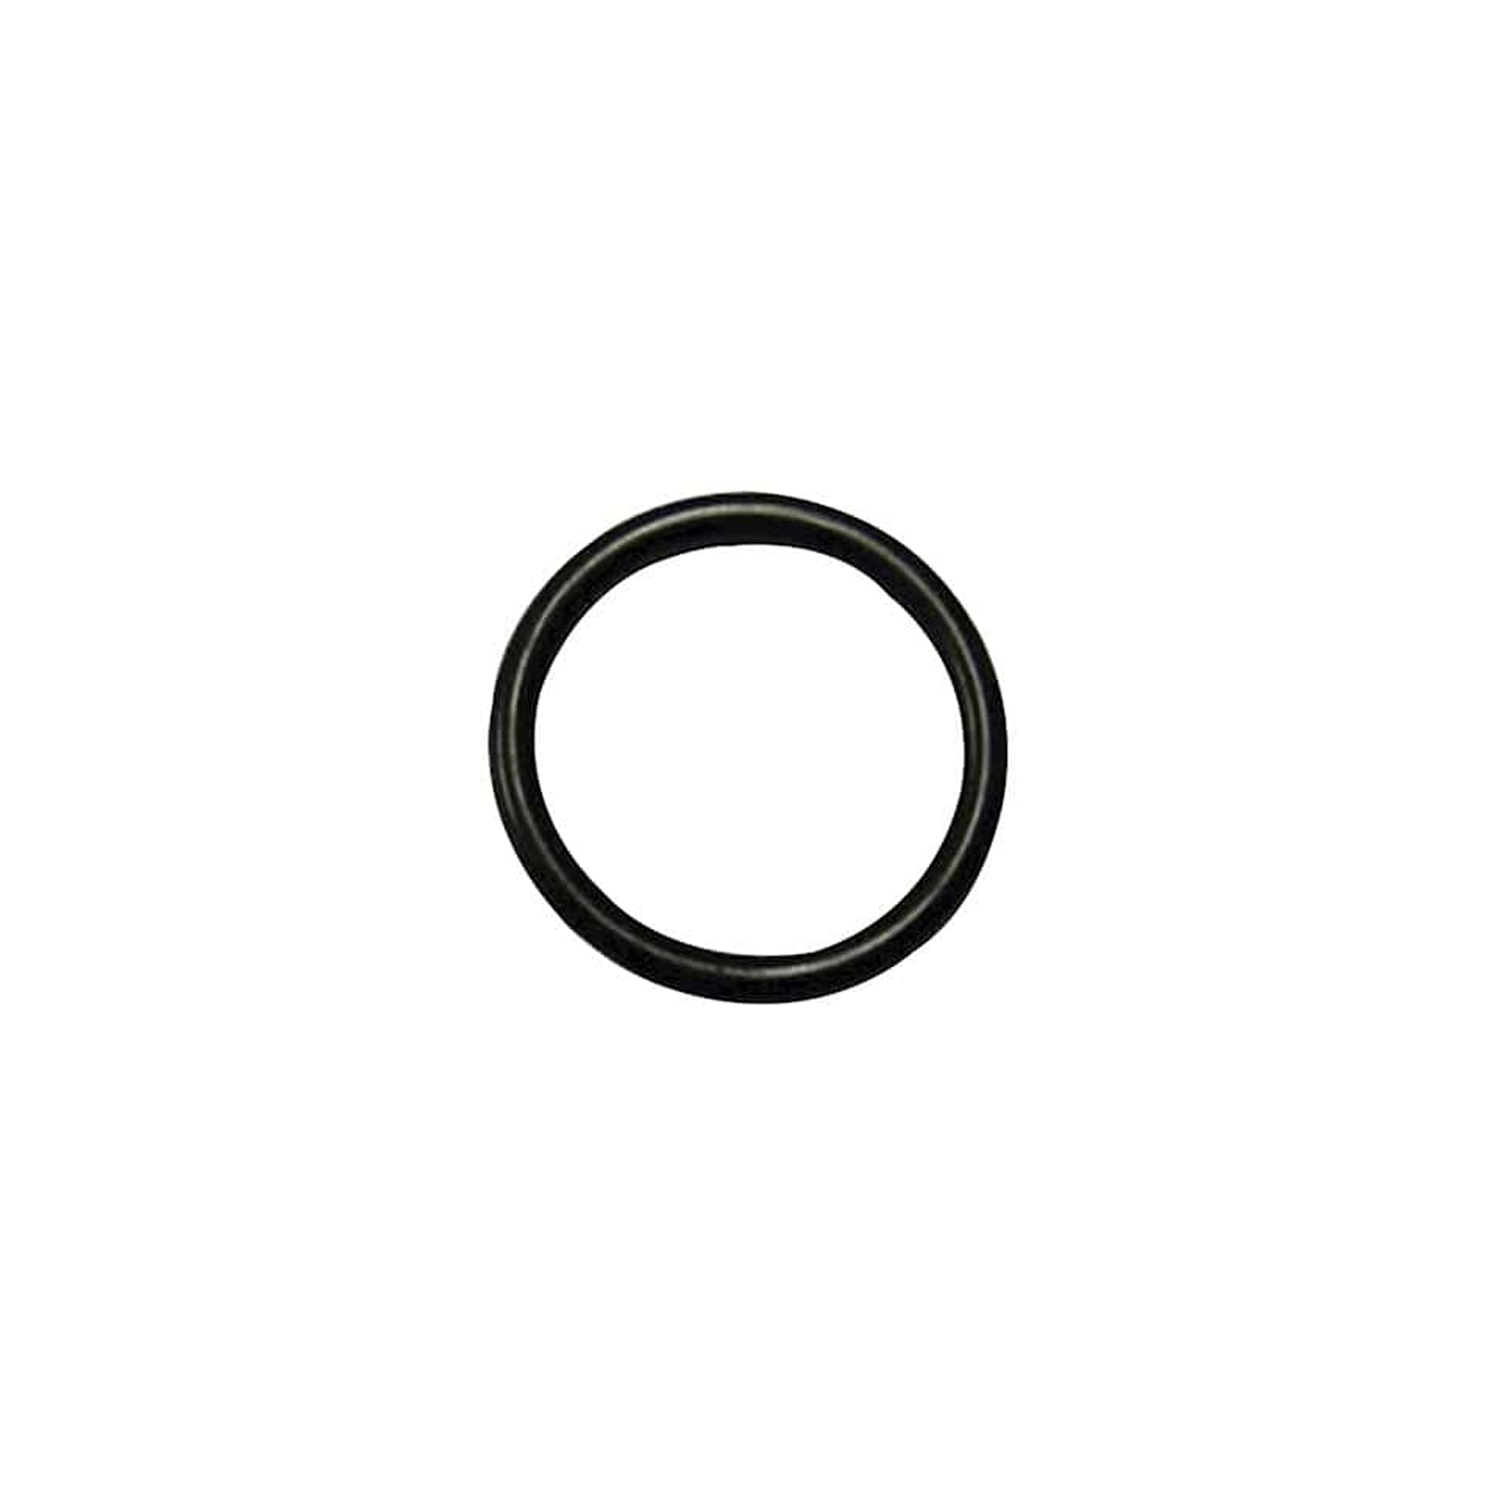 Gaskets (10) for 82634(-M), 90364, 90365